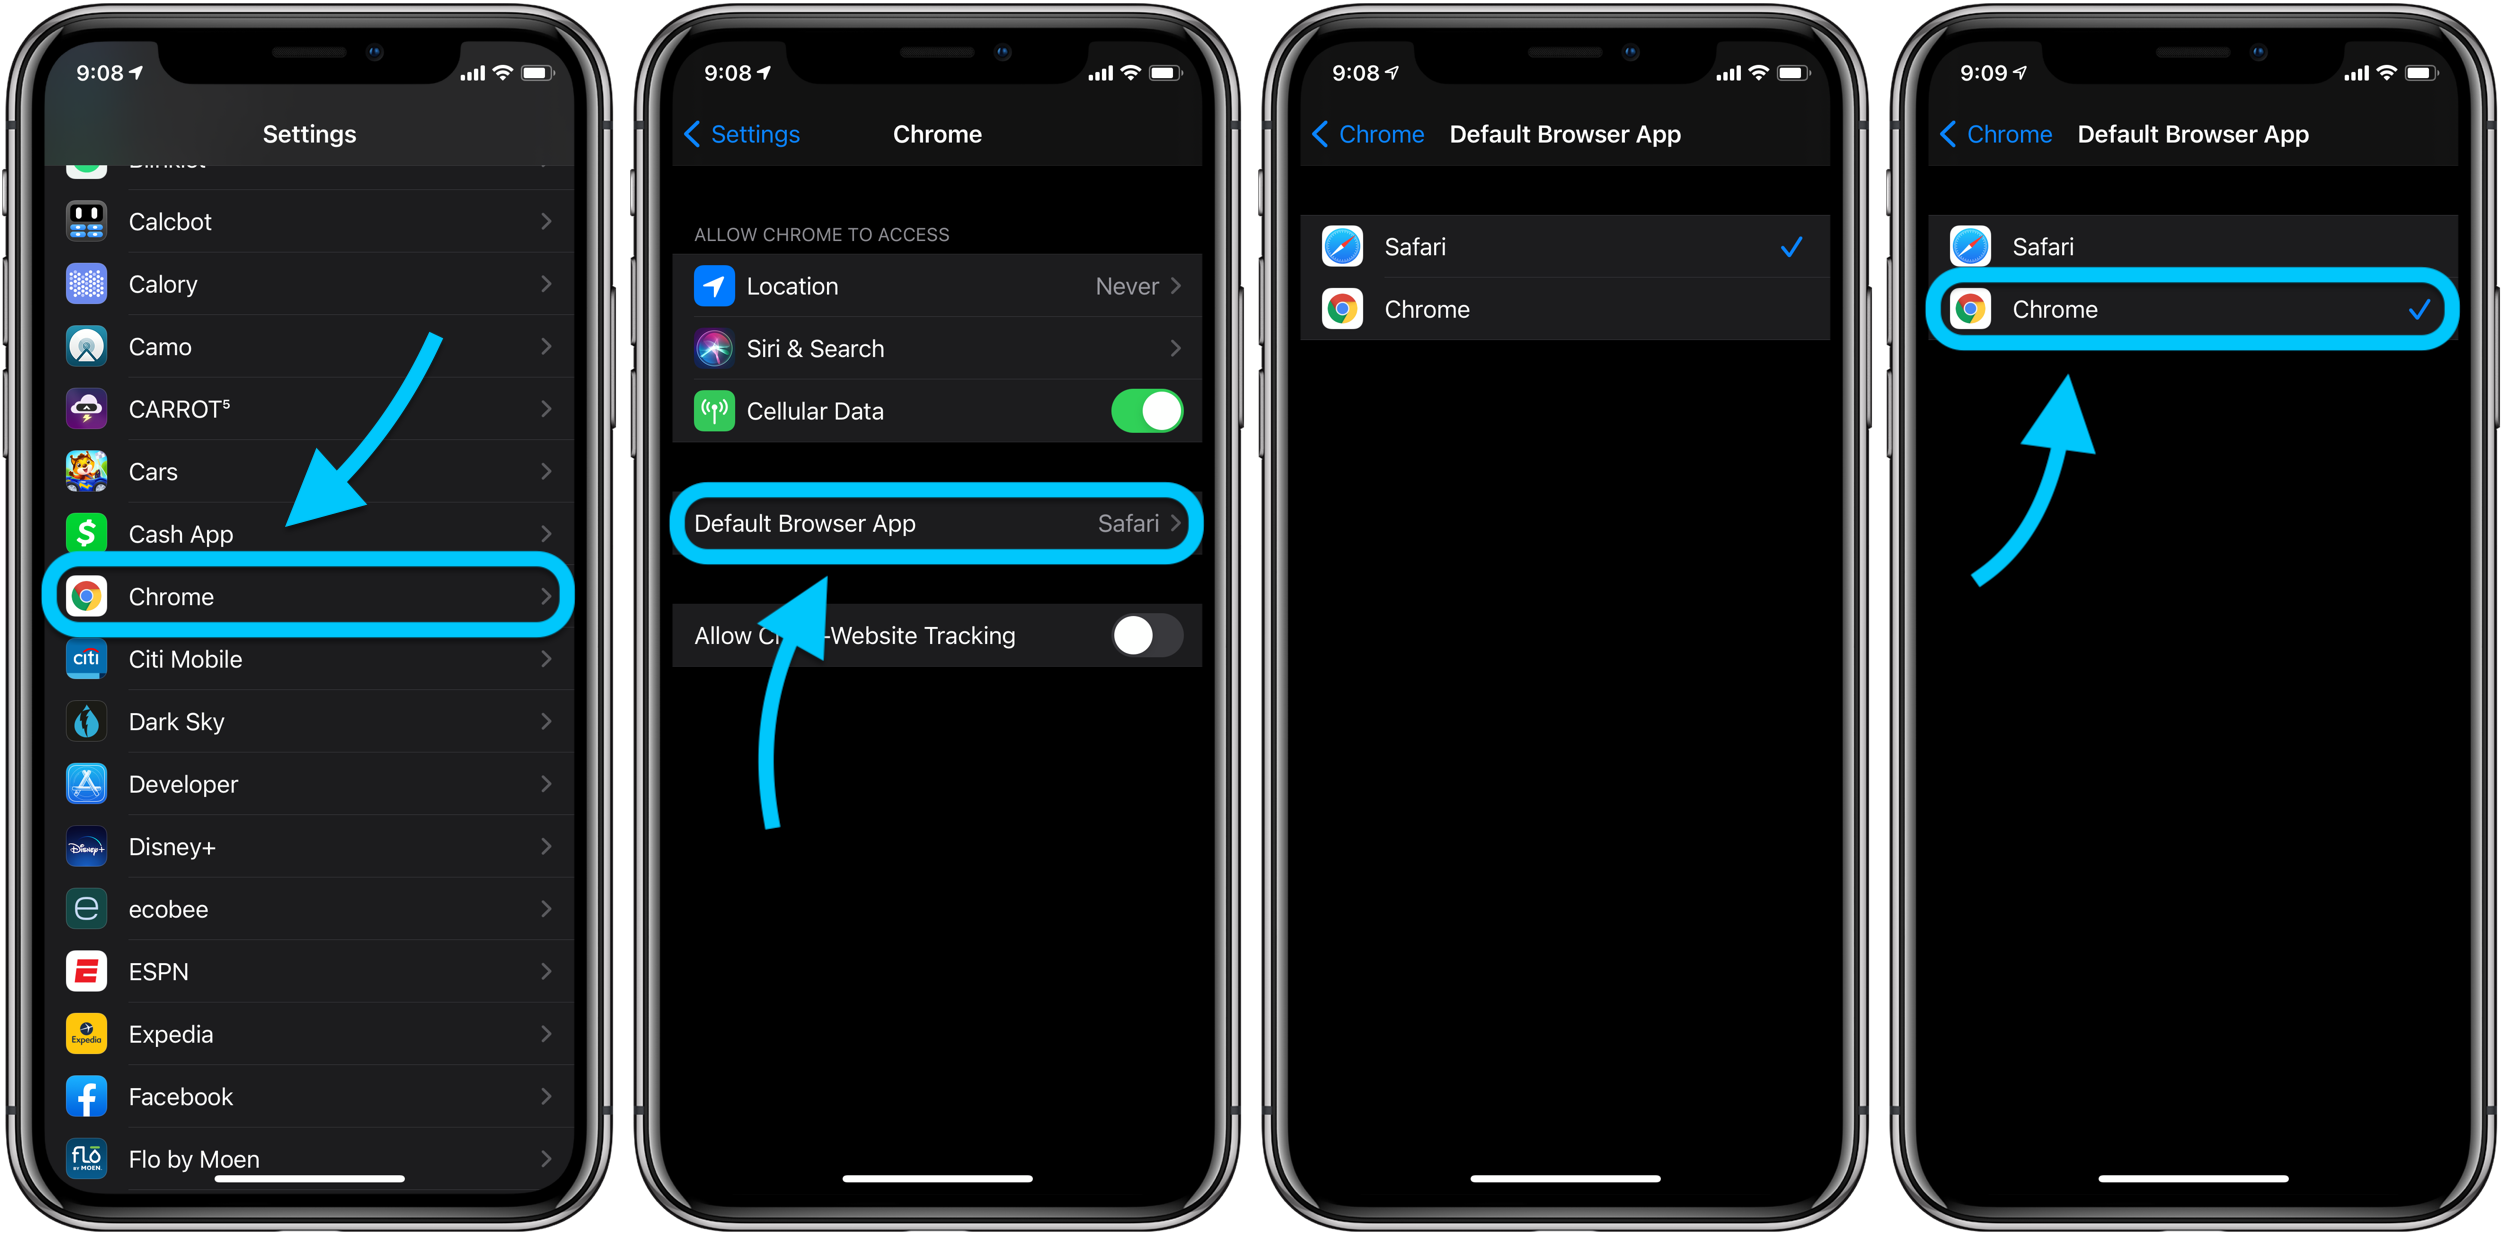 How to change iPhone default email and browser apps - iPhone 12 tips and tricks: 14 cool iOS 14 things to try